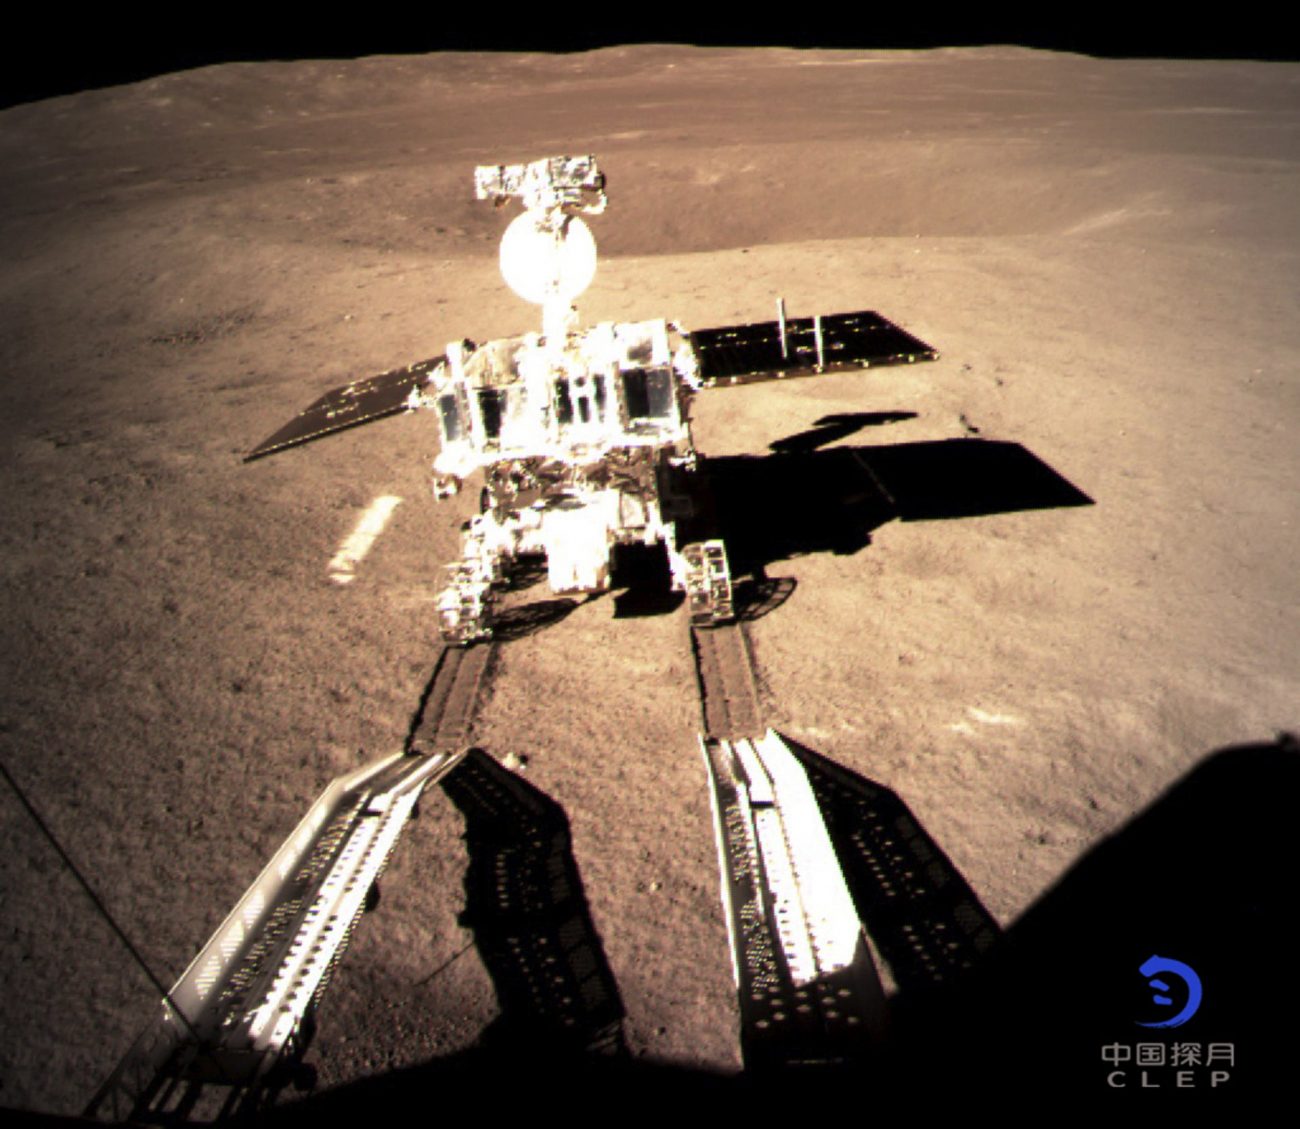 China's Yutu-2 Rover has successfully rolled out onto the lunar surface. Image Credit: CNSA.